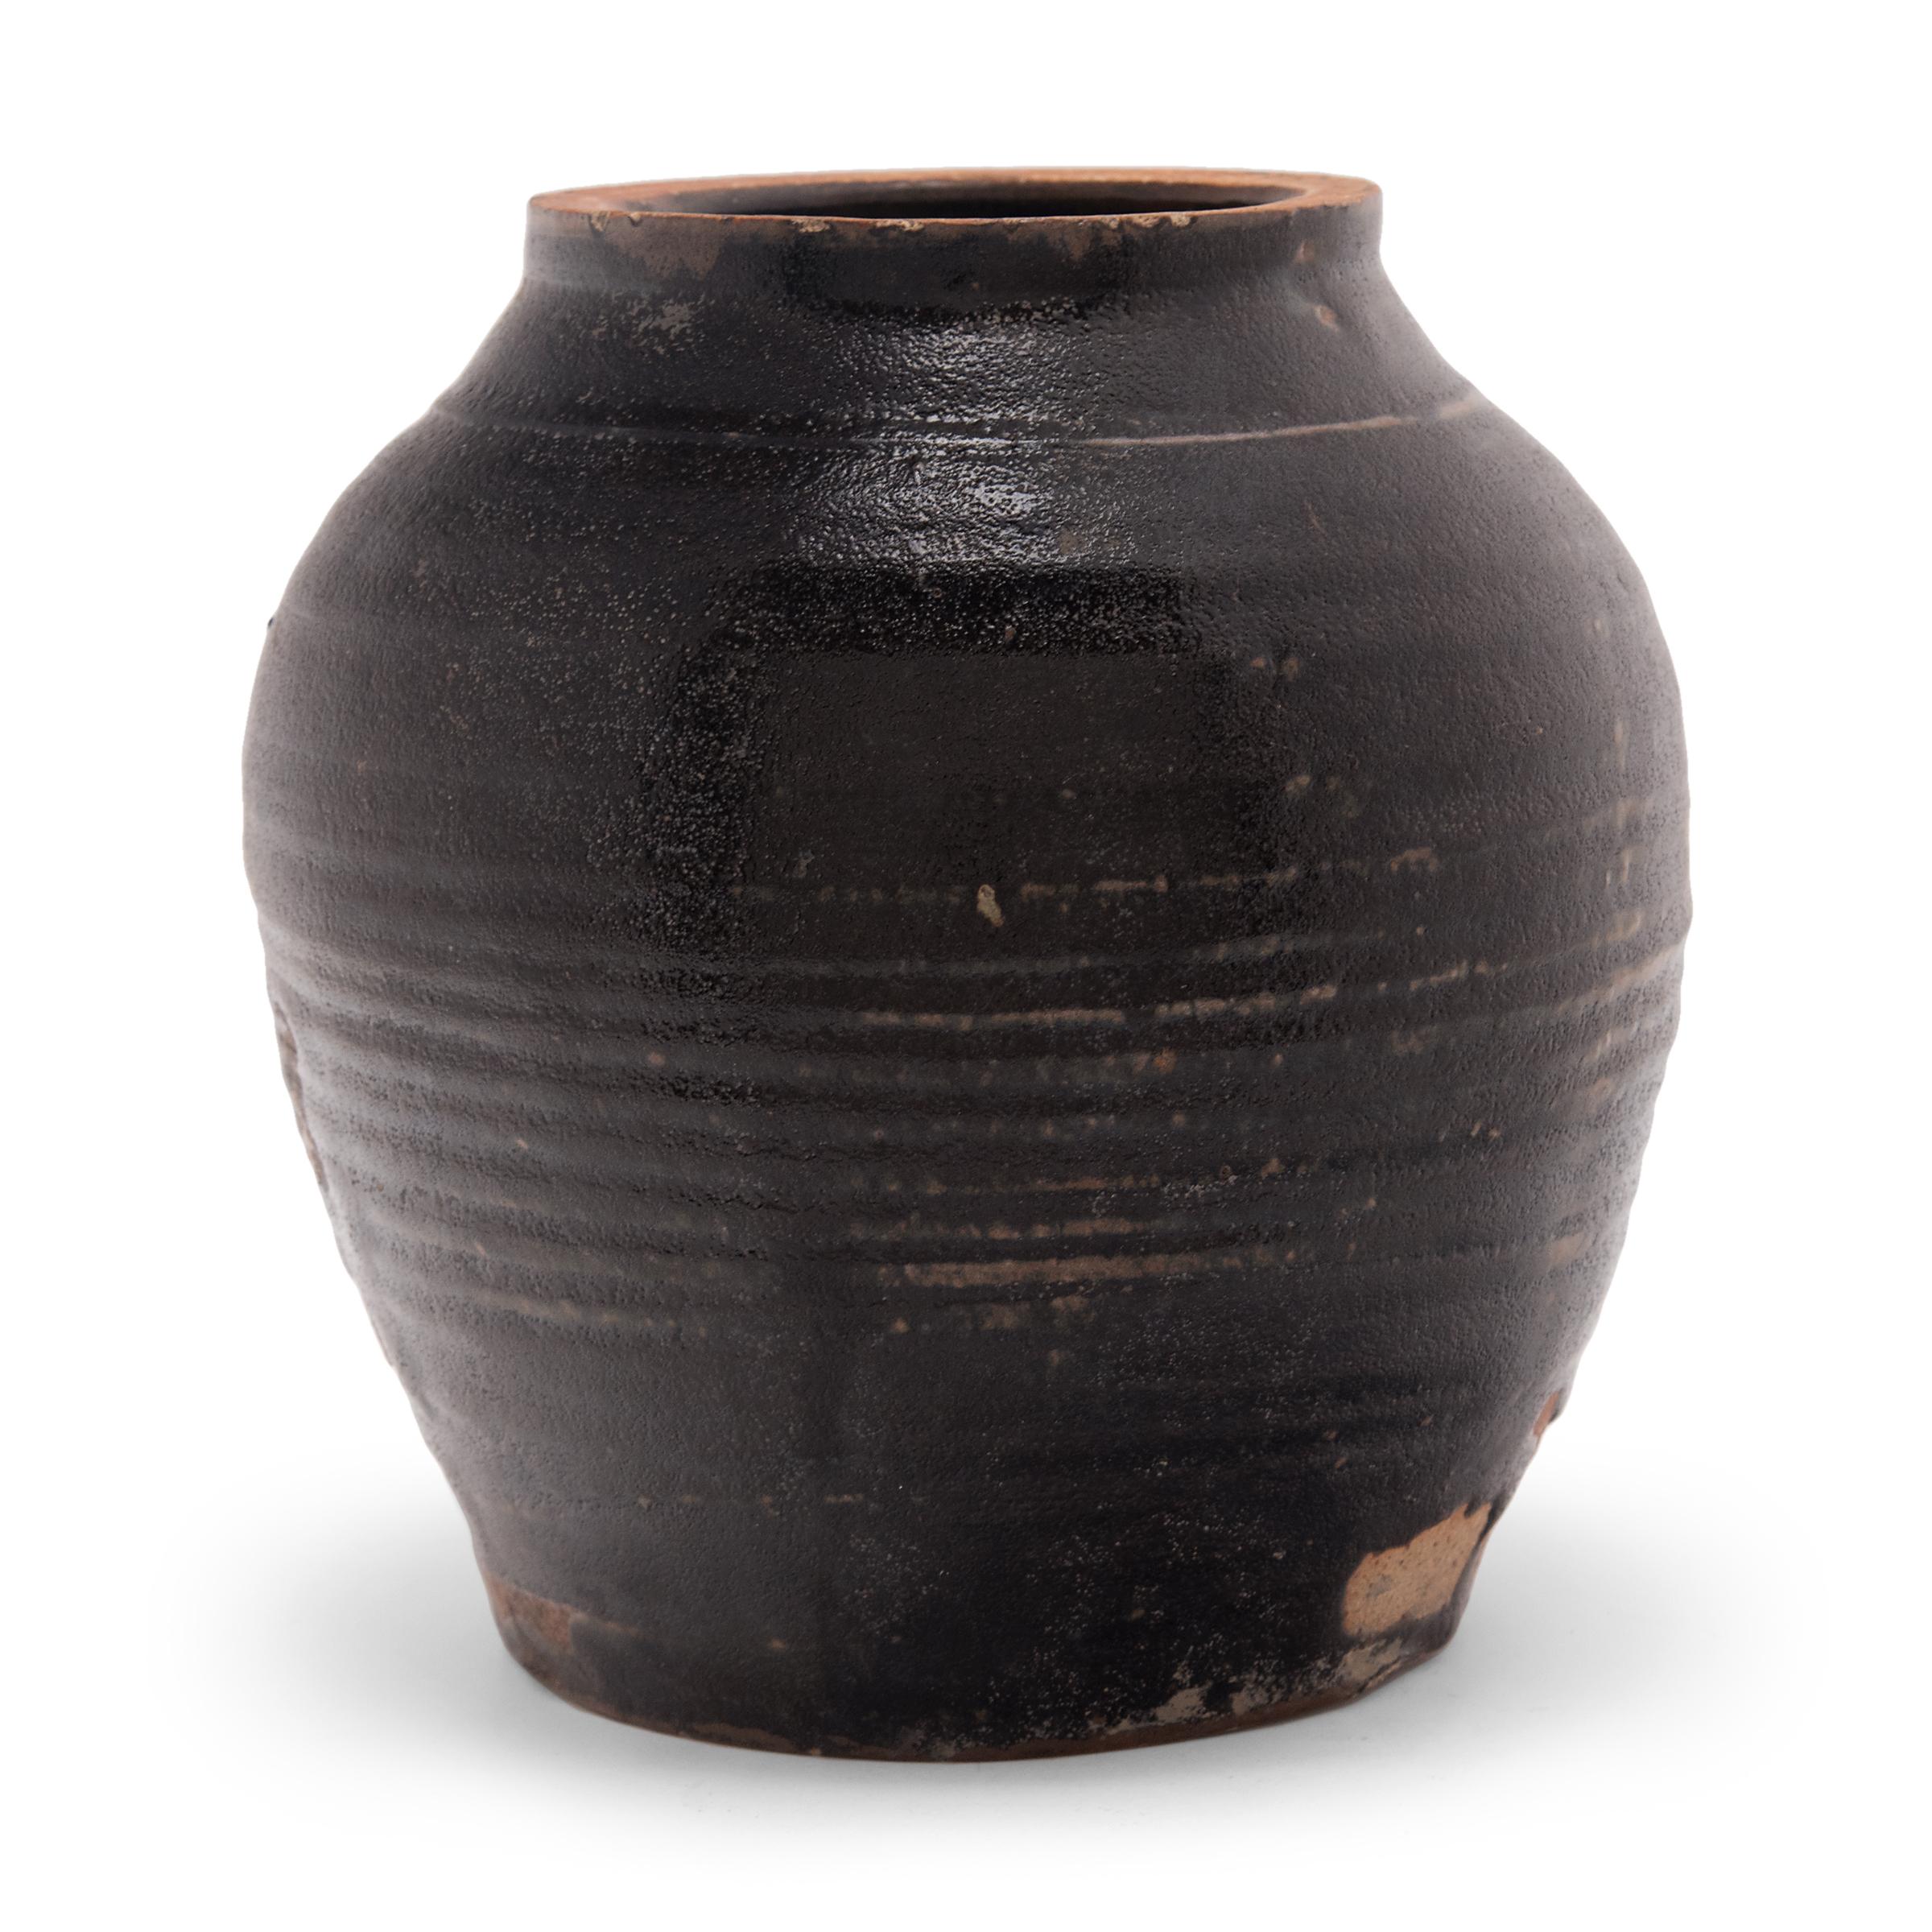 This early 20th century jar is coated in a thick brown glaze that spreads unevenly across the ridged sides, revealing areas of the stoneware body underneath. As evidenced by the interior glaze, the jar was once used to store wet foods in a